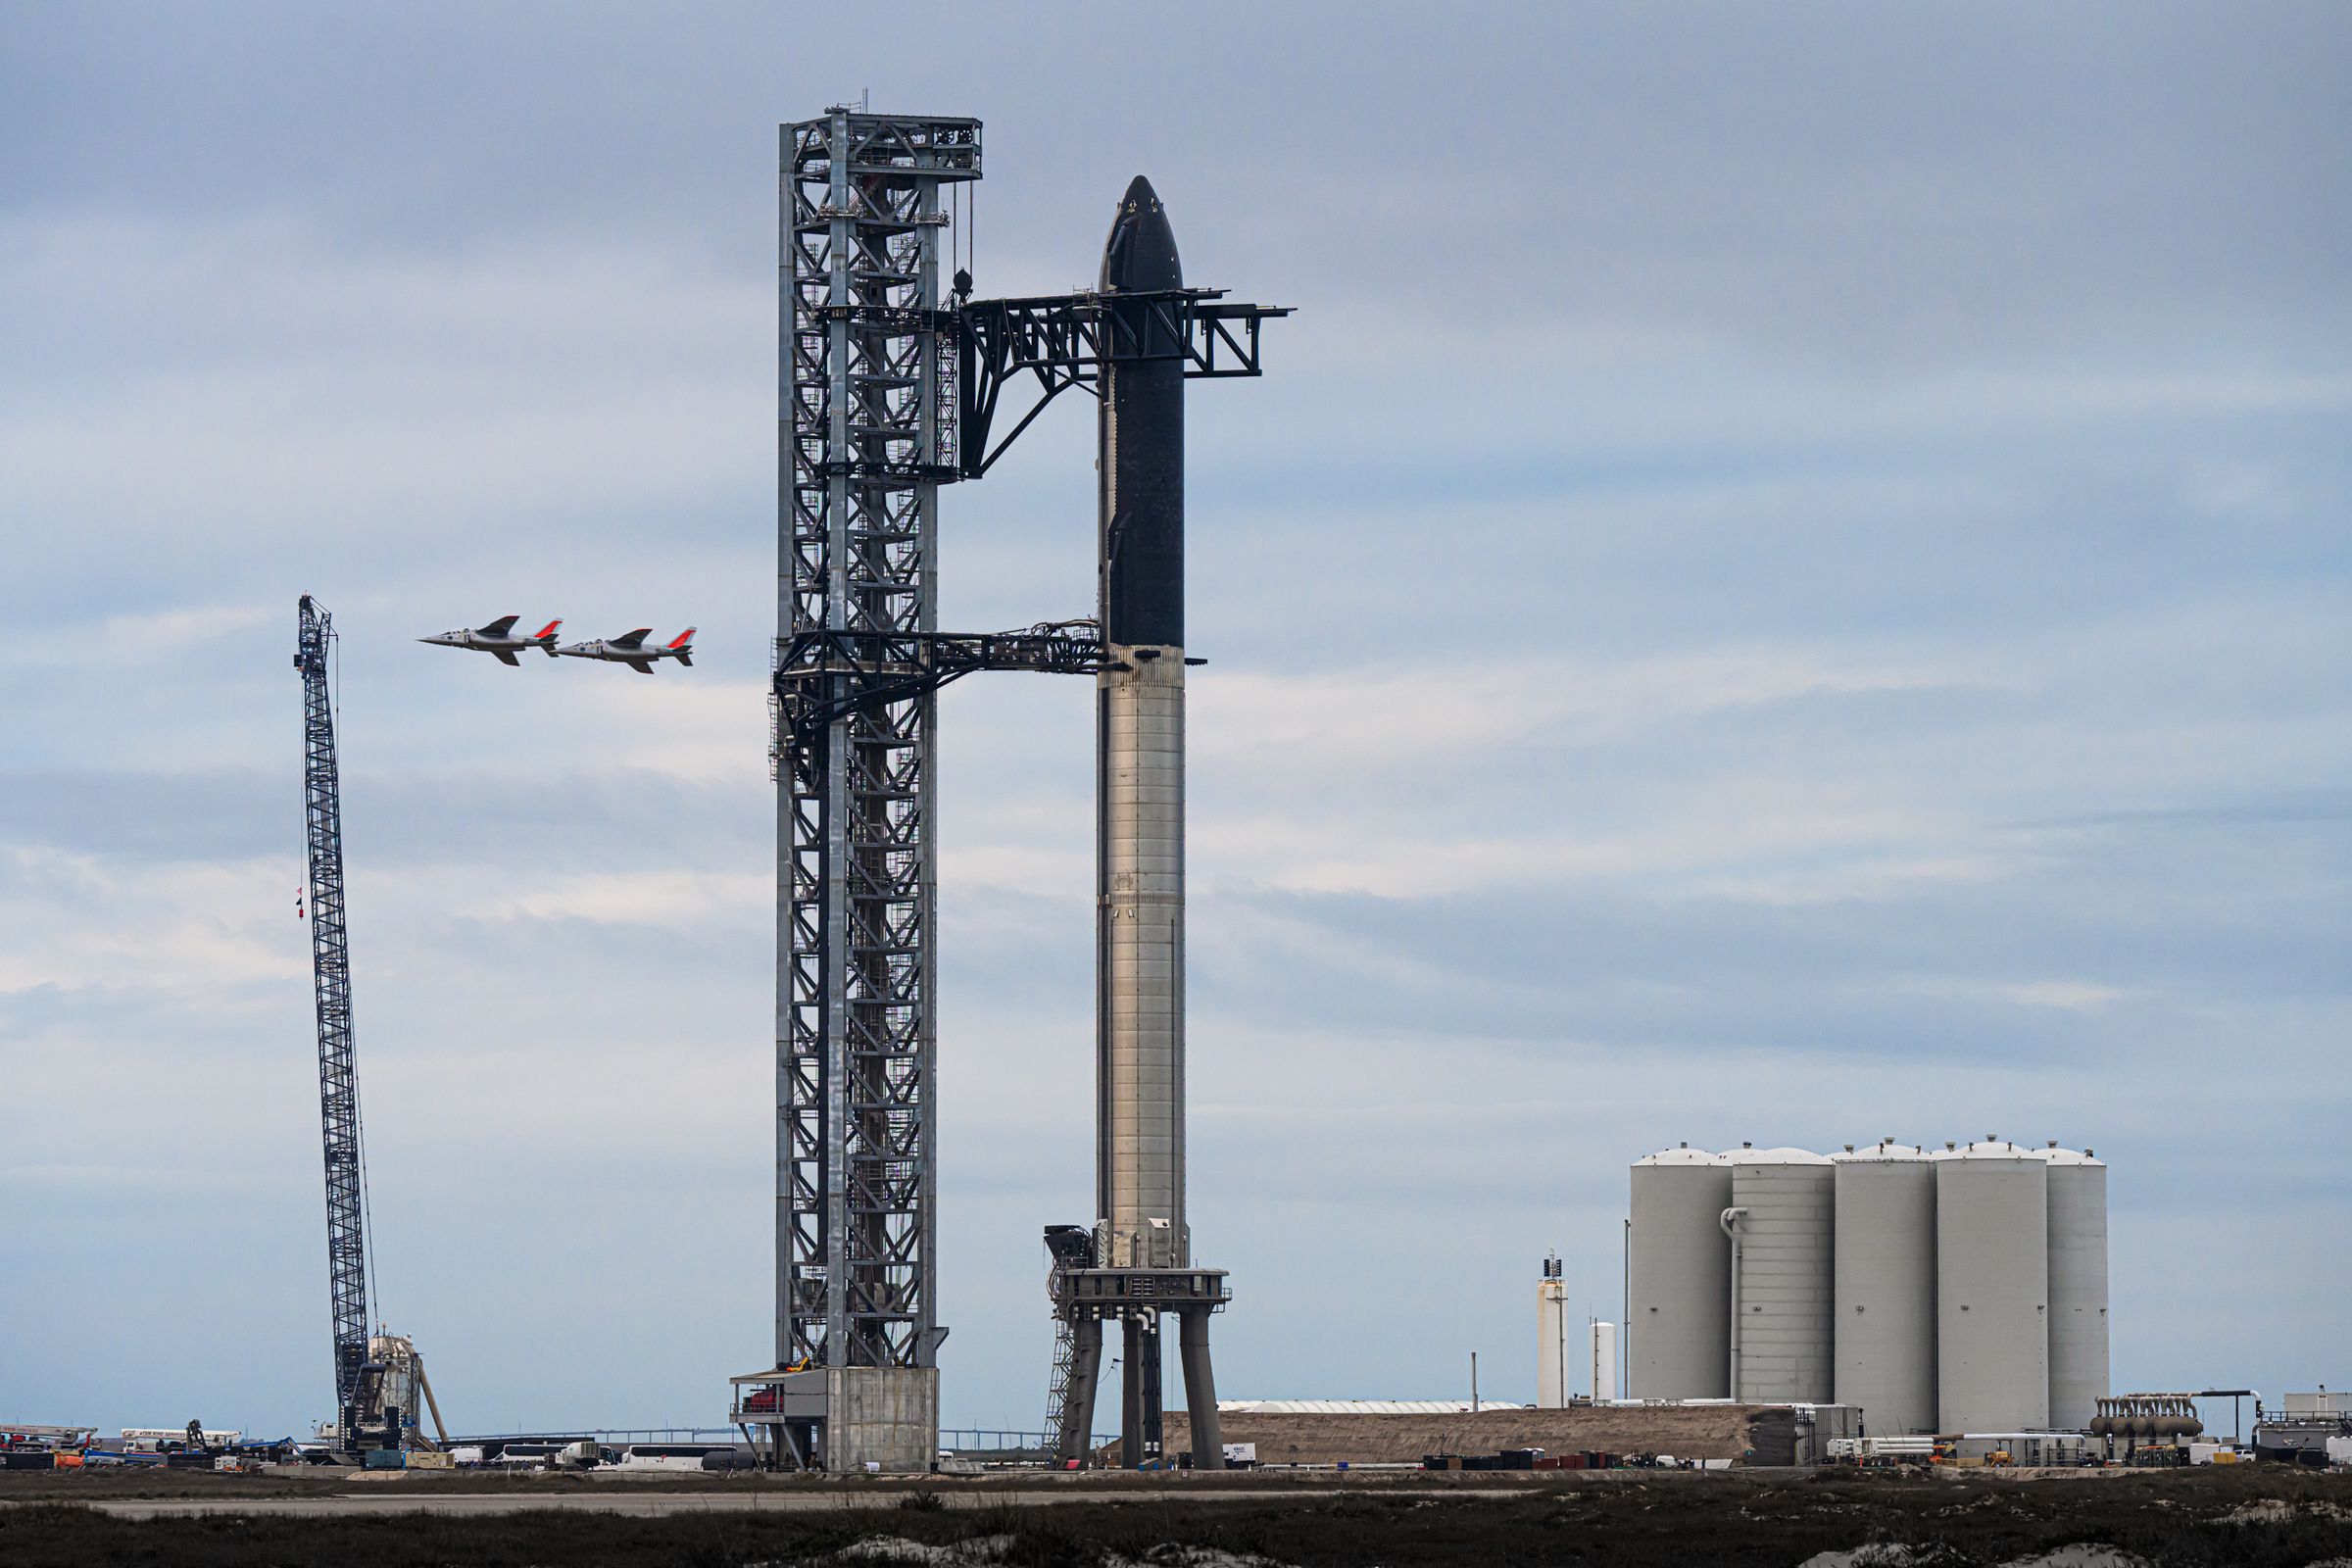 SpaceX’s Starship prototype on the launch mound in Boca Chica, Texas.